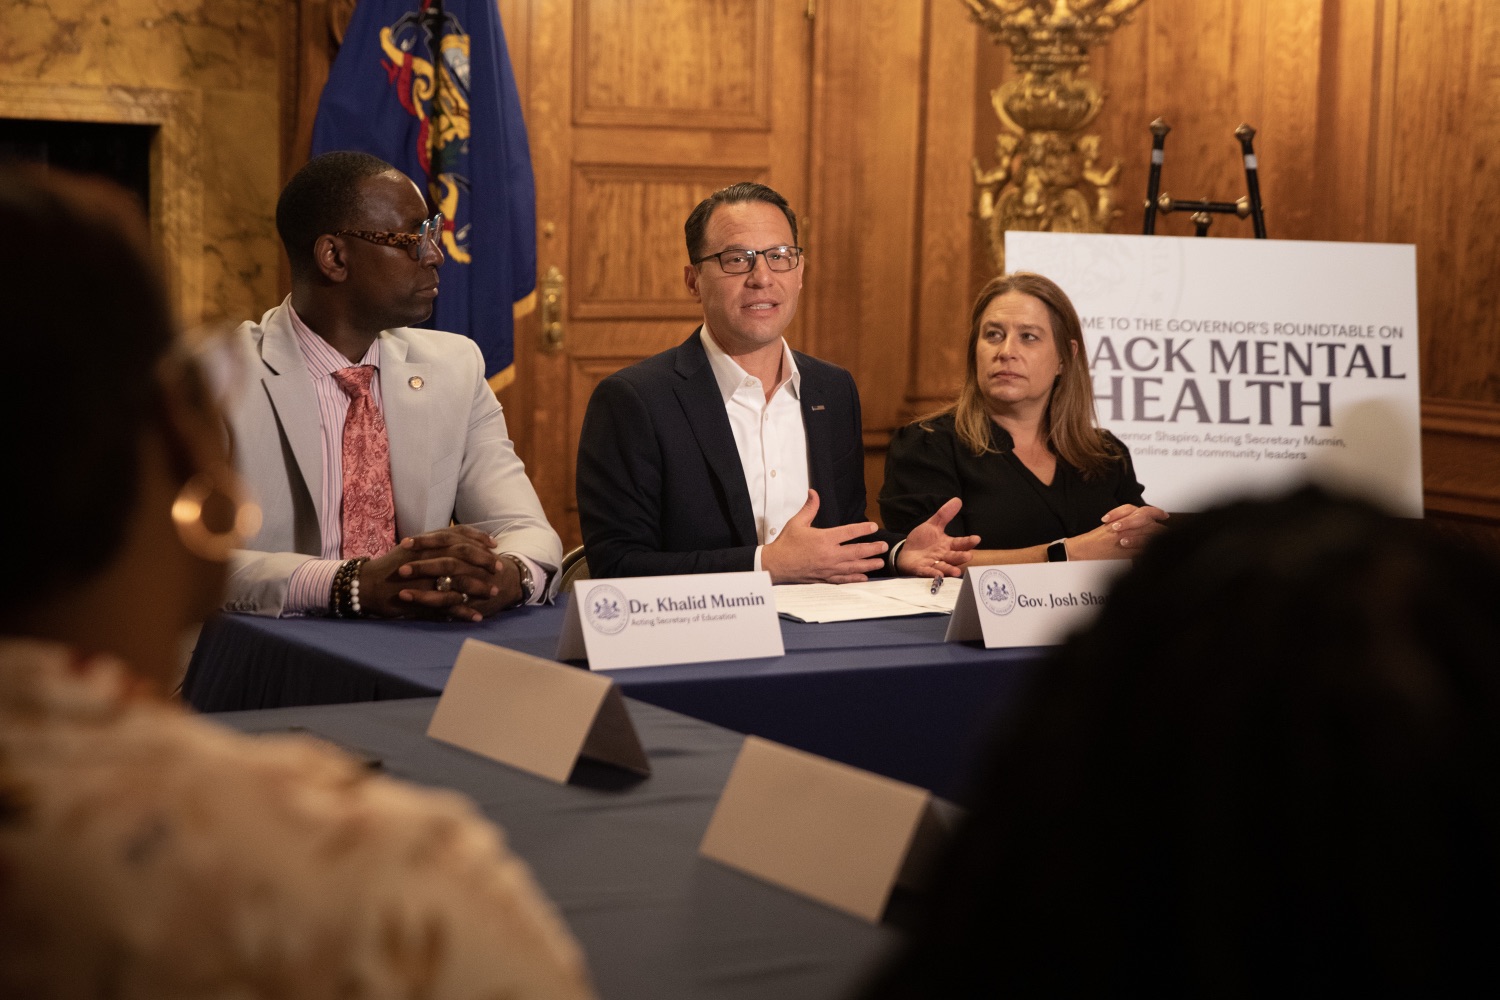 Governor Shapiro leads a roundtable discussion on Black mental health with content creators, community leaders, and clinicians to discuss how his budget invests in mental health services for Black communities across the Commonwealth. He is joined by Acting Secretary of Education Dr. Khalid Mumin and First Lady Shapiro. Attendees include: LaToi Storr, Jasiri X, Jasmine Green, Farida Boyer, Stephen Sharp, Julius Boatwright, Johnnie Geathers, Dr. Channing L. Moreland, and Jessica Gurley. Pictured here is Governor Shapiro, delivering remarks during the roundtable discussion.<br><a href="https://filesource.amperwave.net/commonwealthofpa/photo/23156_Gov_Black_Mental_Health_JP_11.jpg" target="_blank">⇣ Download Photo</a>